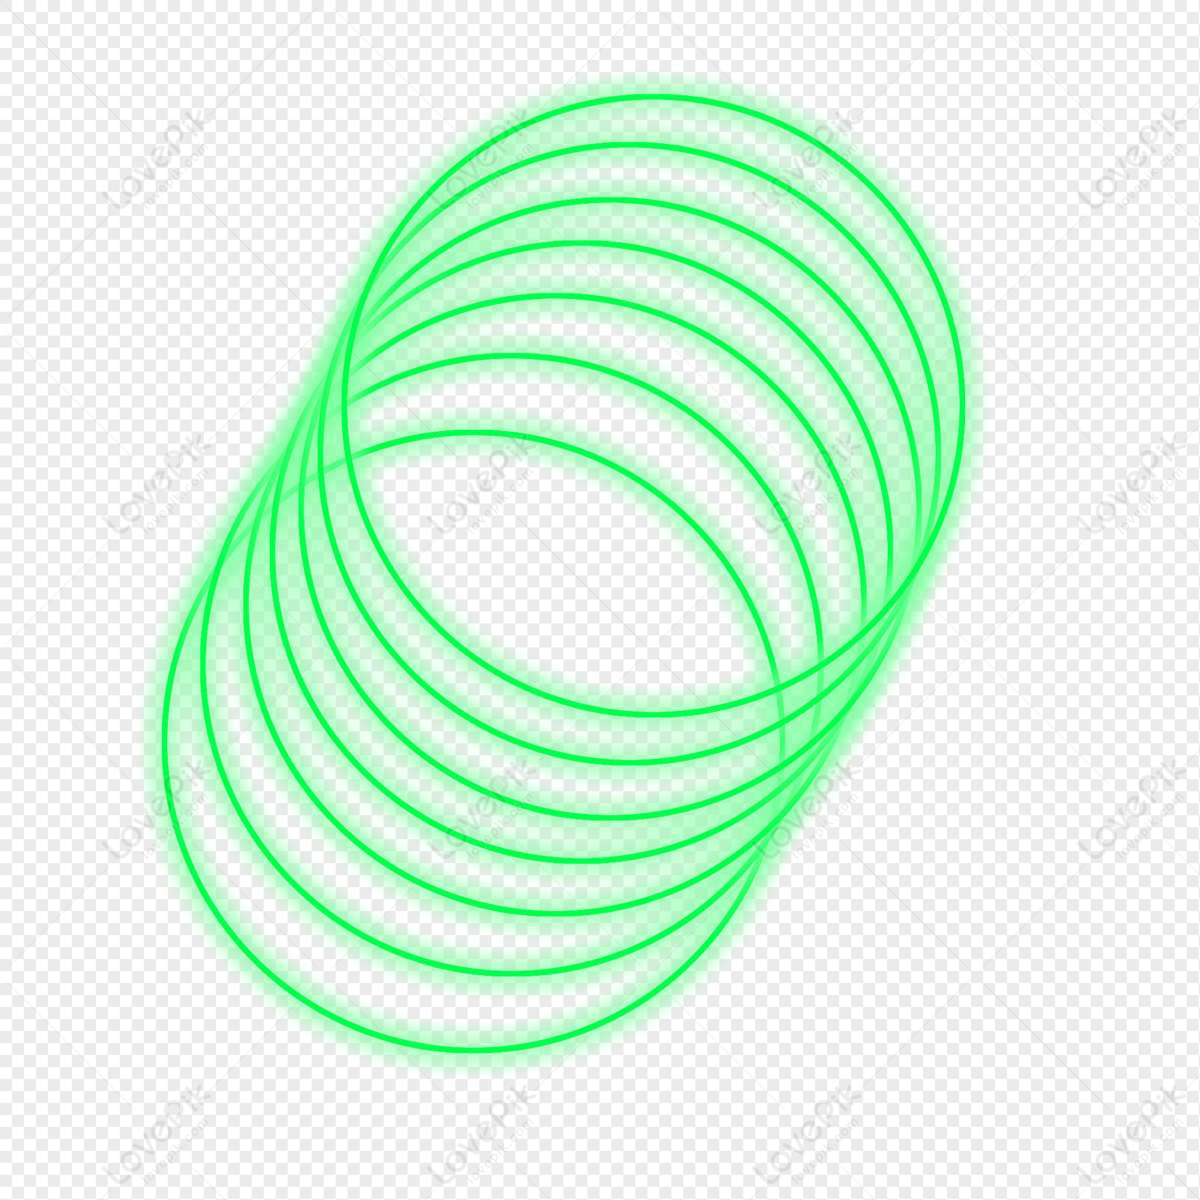 ring-light-png-images-with-transparent-background-free-download-on